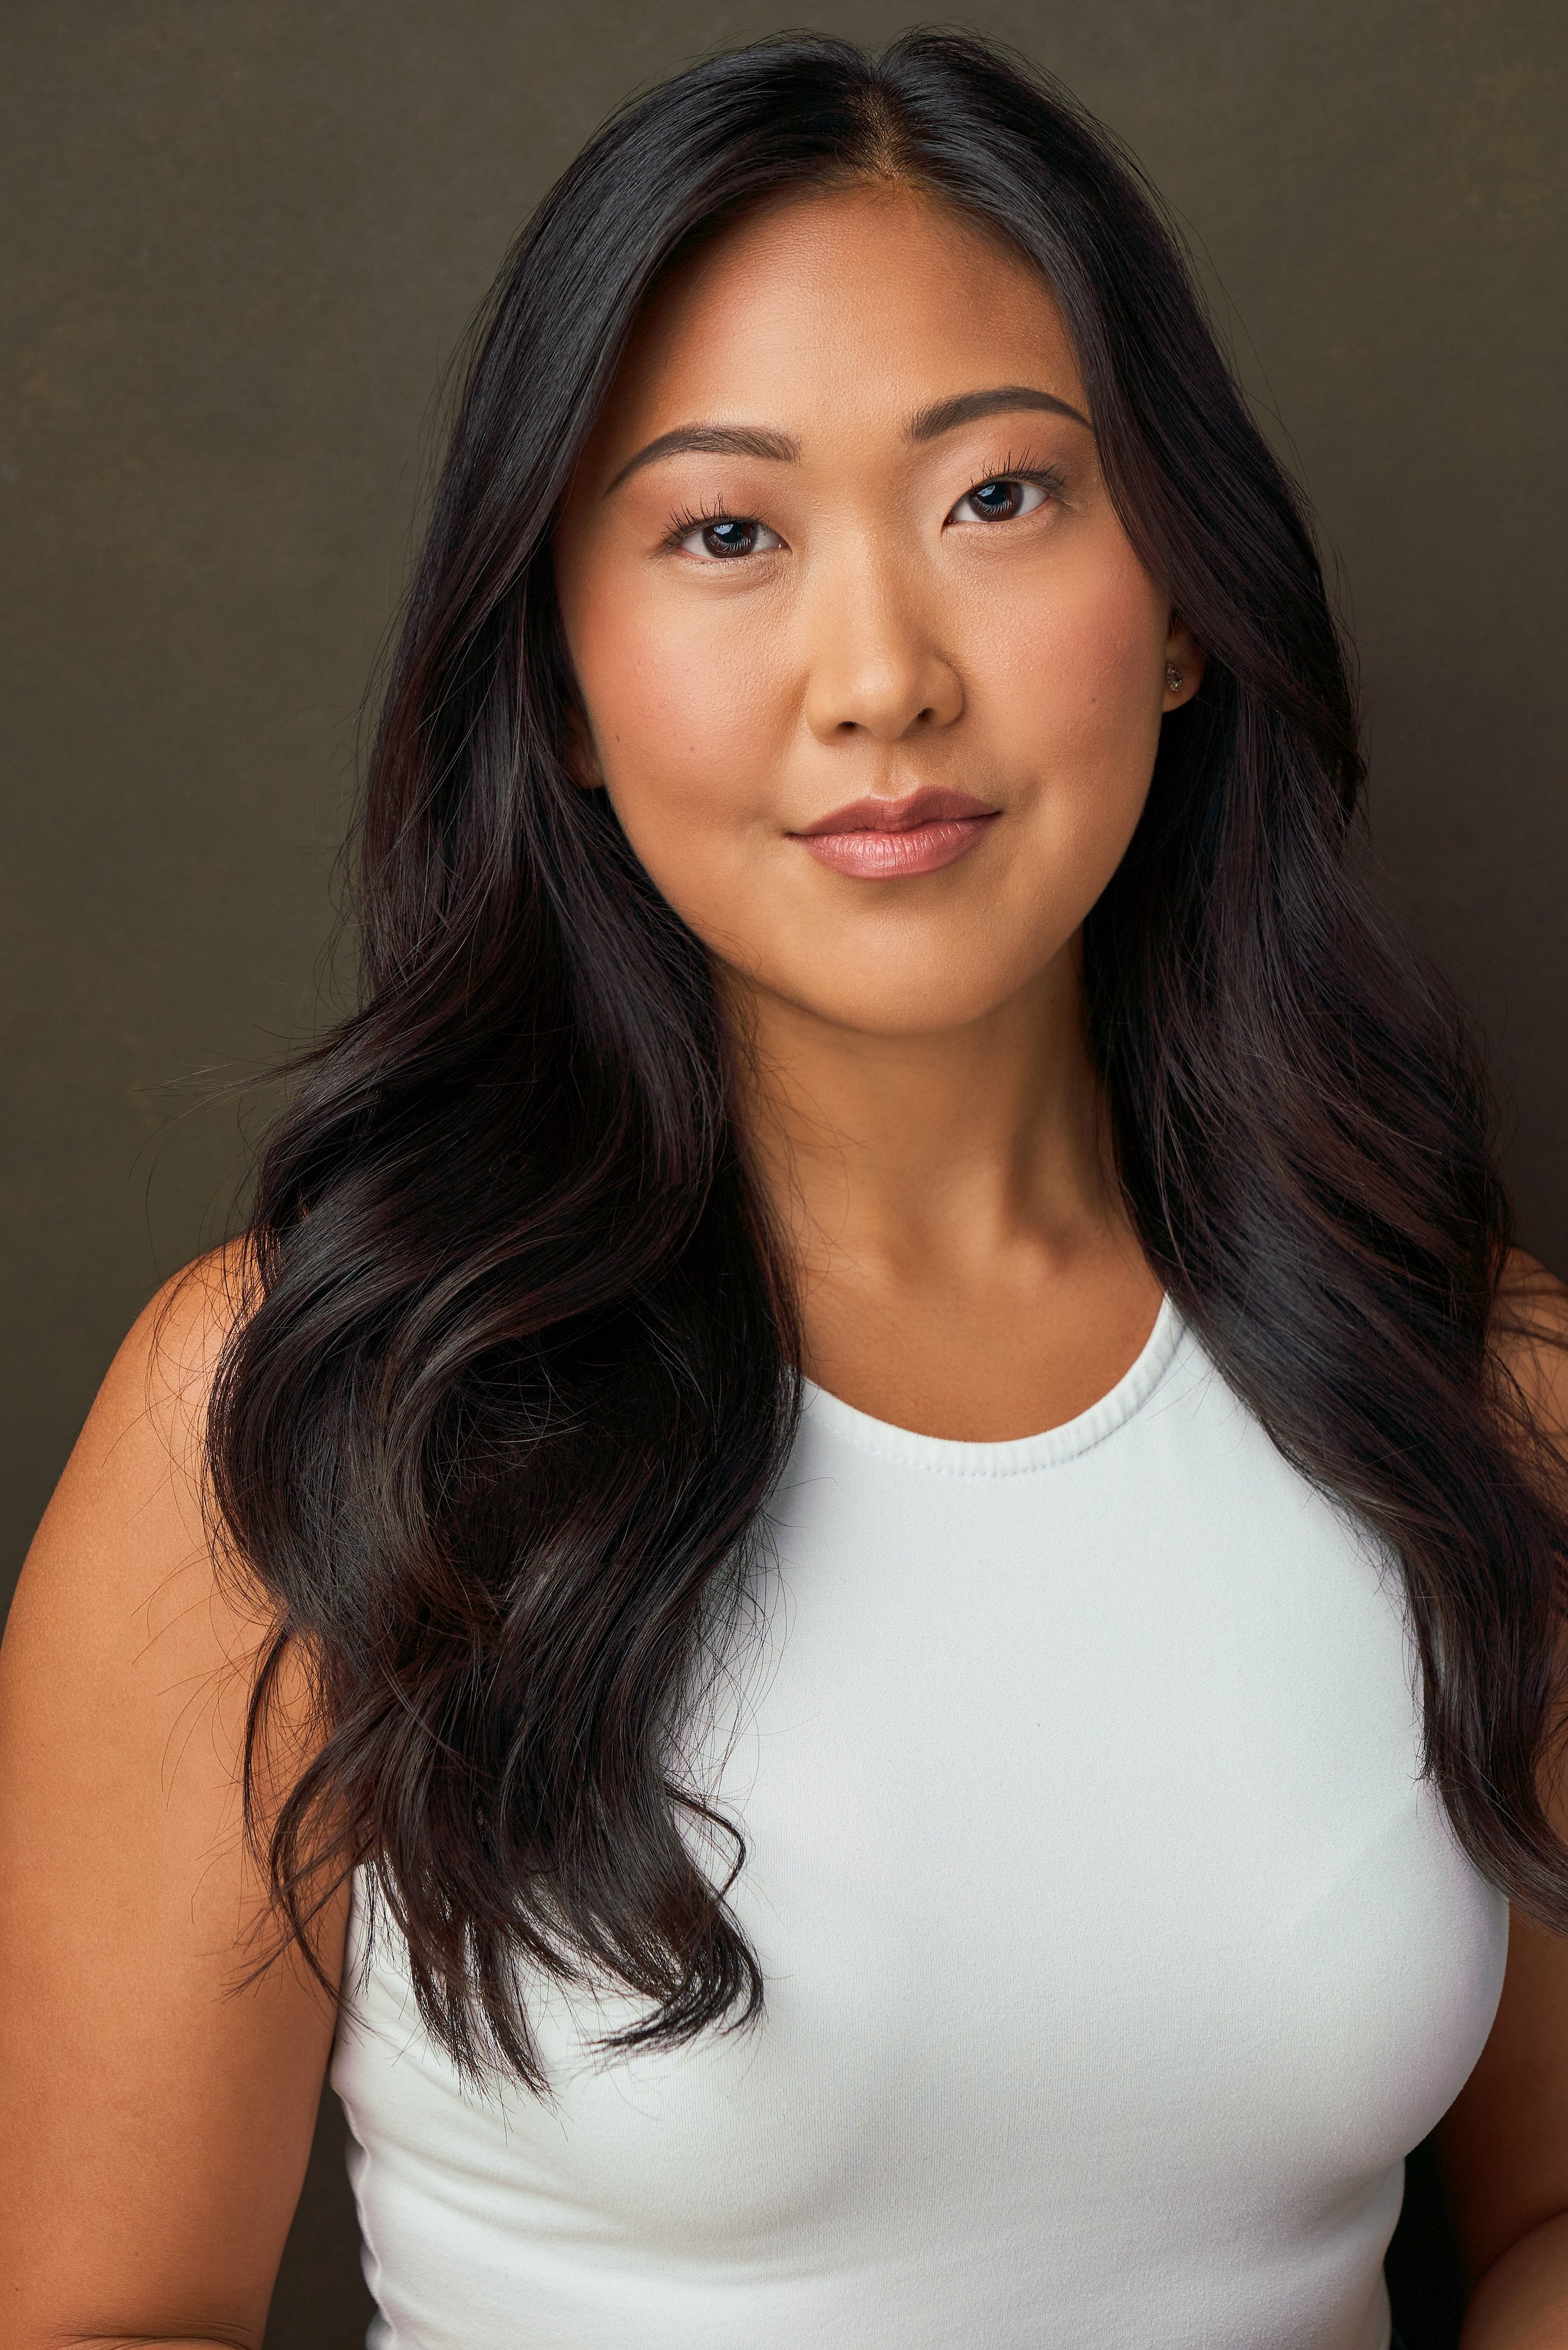 General Theatrical Headshot for Atlanta Actor, Sora Yi | Hair and Makeup by Anne-Marie Kennedy